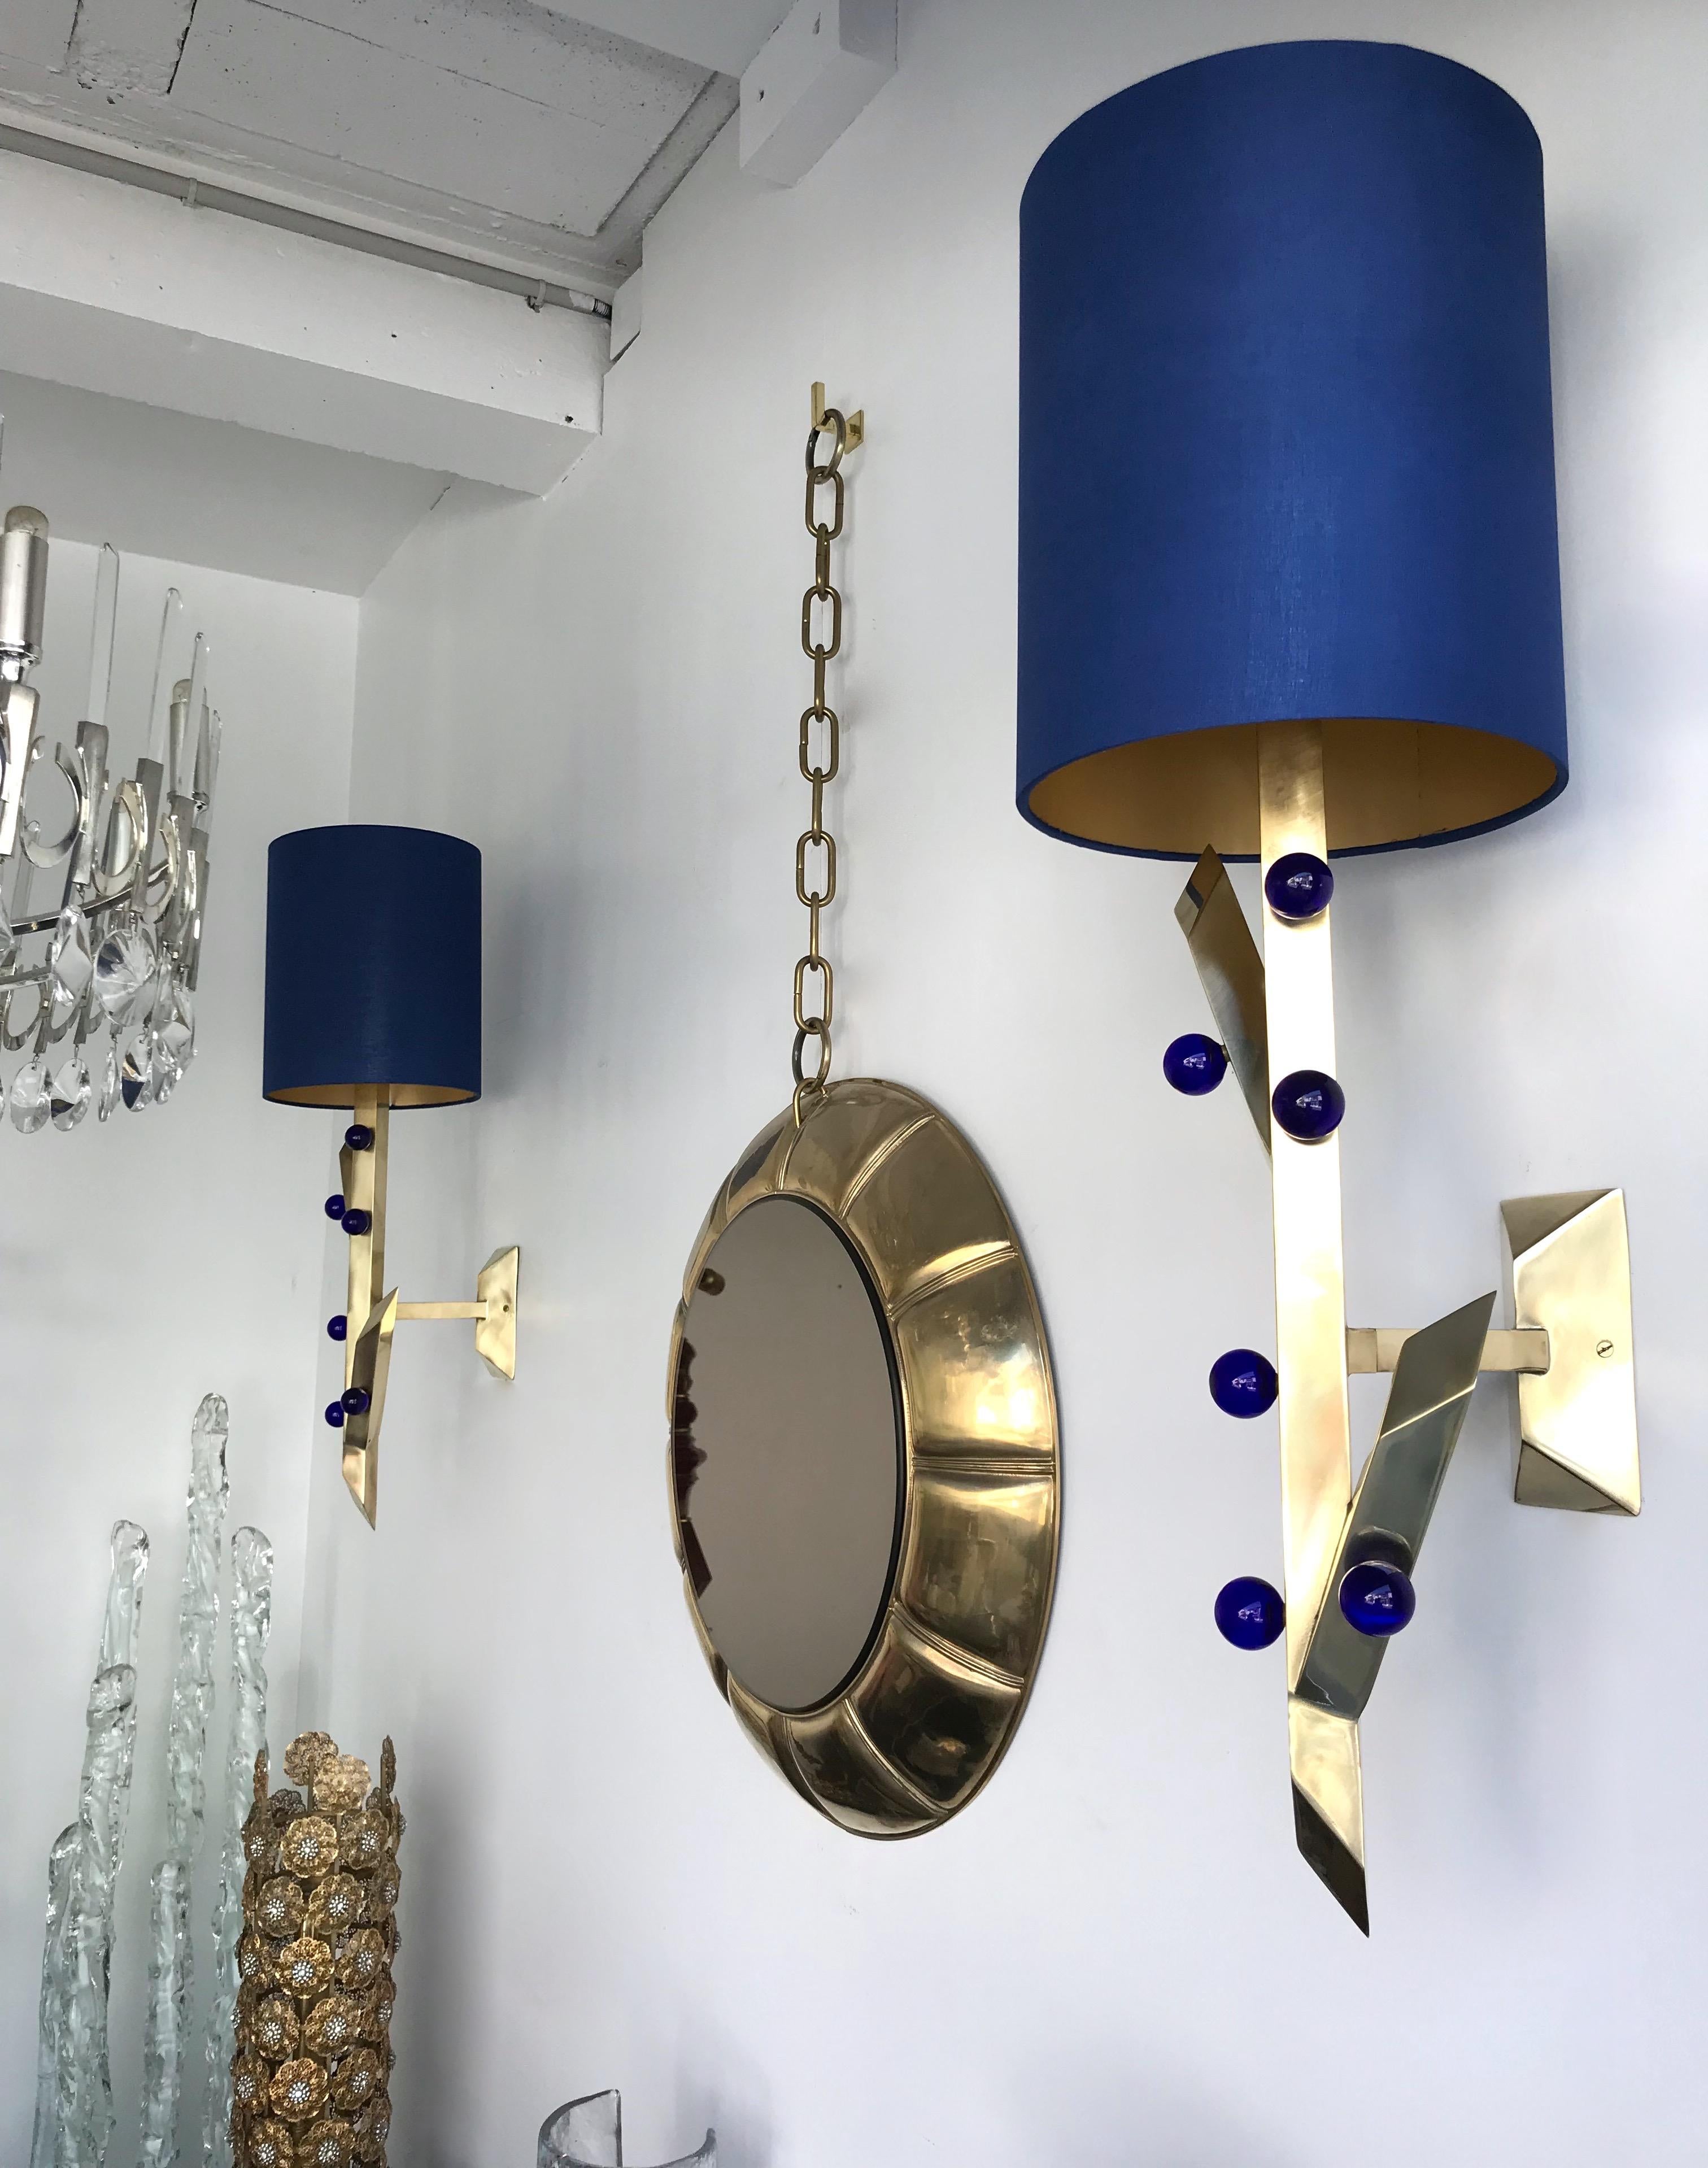 Very decorative contemporary pair of brass and Blue Murano glass ball sconces. Plant style. Minor imperfections on shades. The shades are always included. Small artisanal production from an Italian workshop.